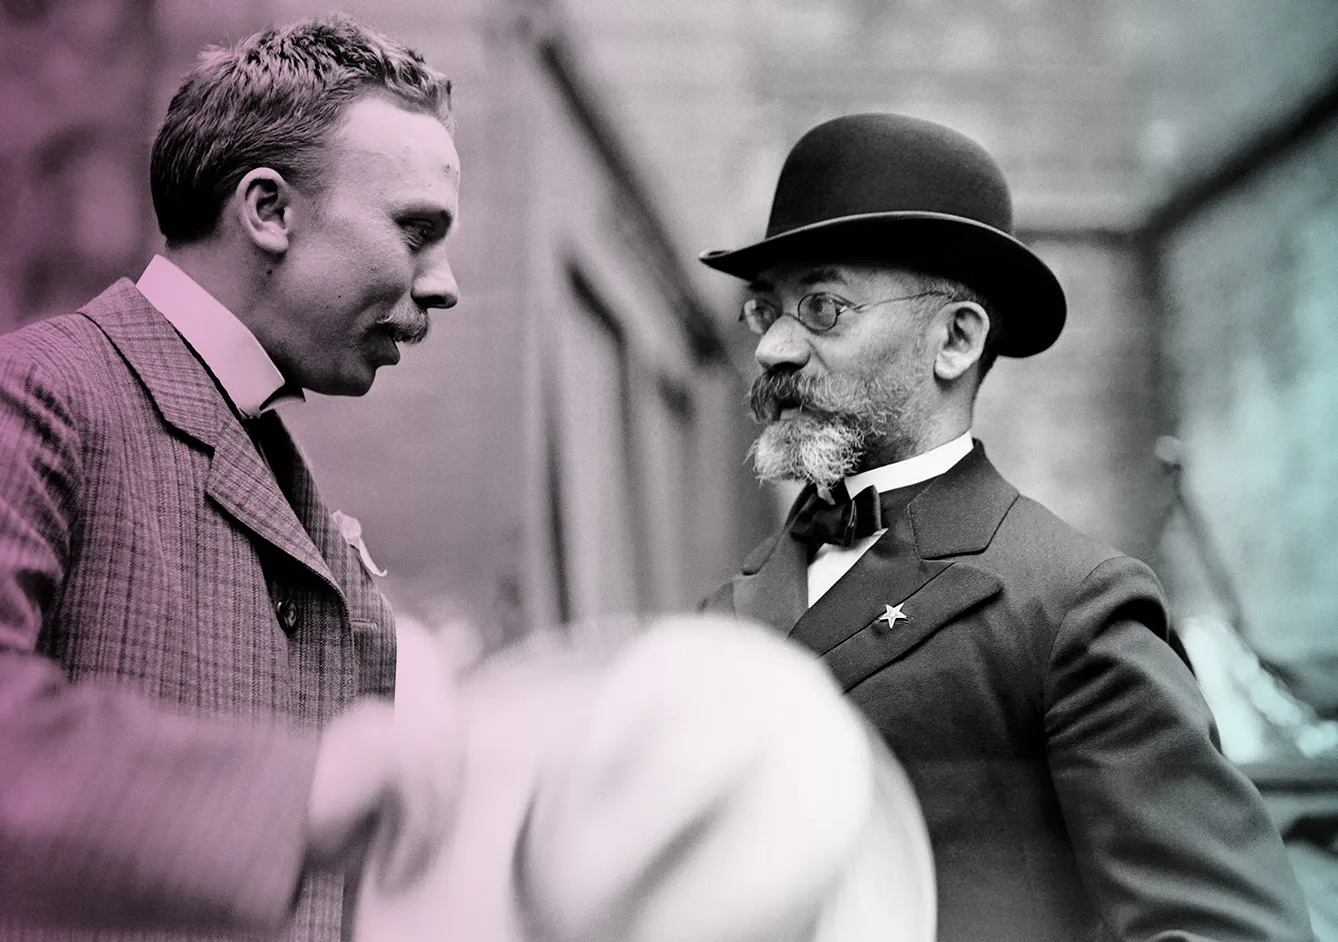 Ludvic Lazarus Zamenhof (right) an ophthalmologist, philologist, and the inventor of Esperanto, a constructed language designed for international communication in 1910